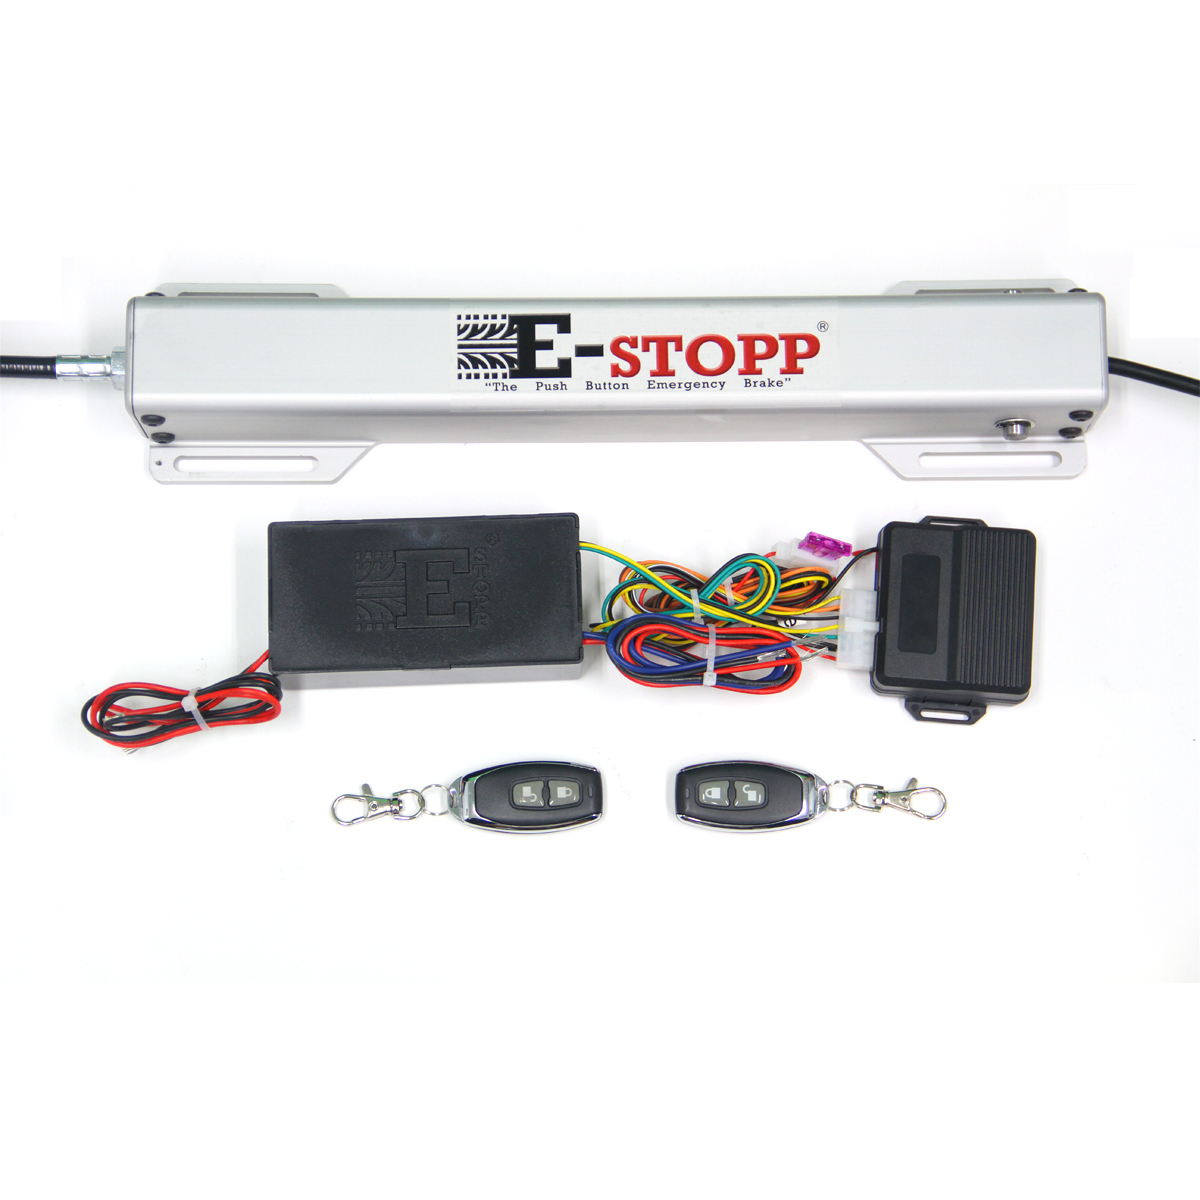 E-Stopp Electric Emergency Brake System with Remote Transmitters